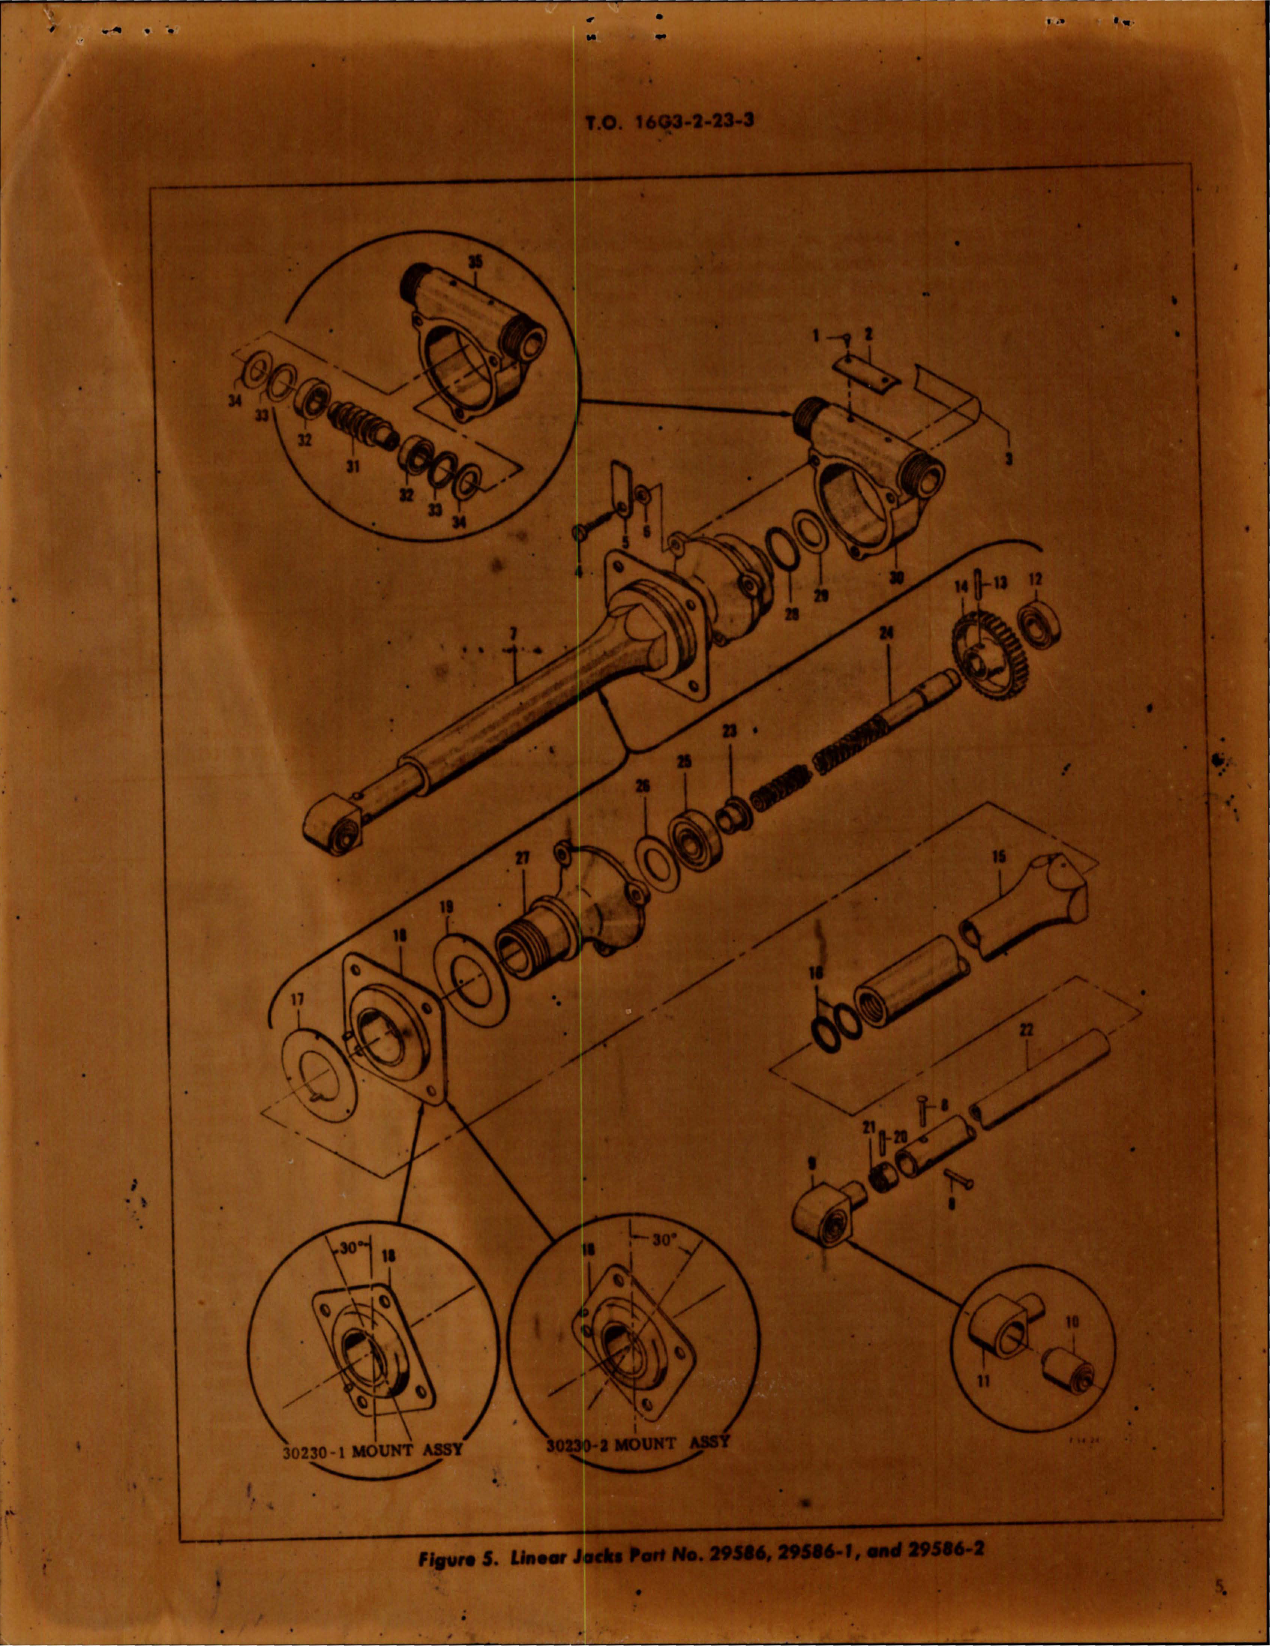 Sample page 5 from AirCorps Library document: Overhaul Instructions with Parts for Linear Jack Parts 29586, 29586-1 and 29586-2 